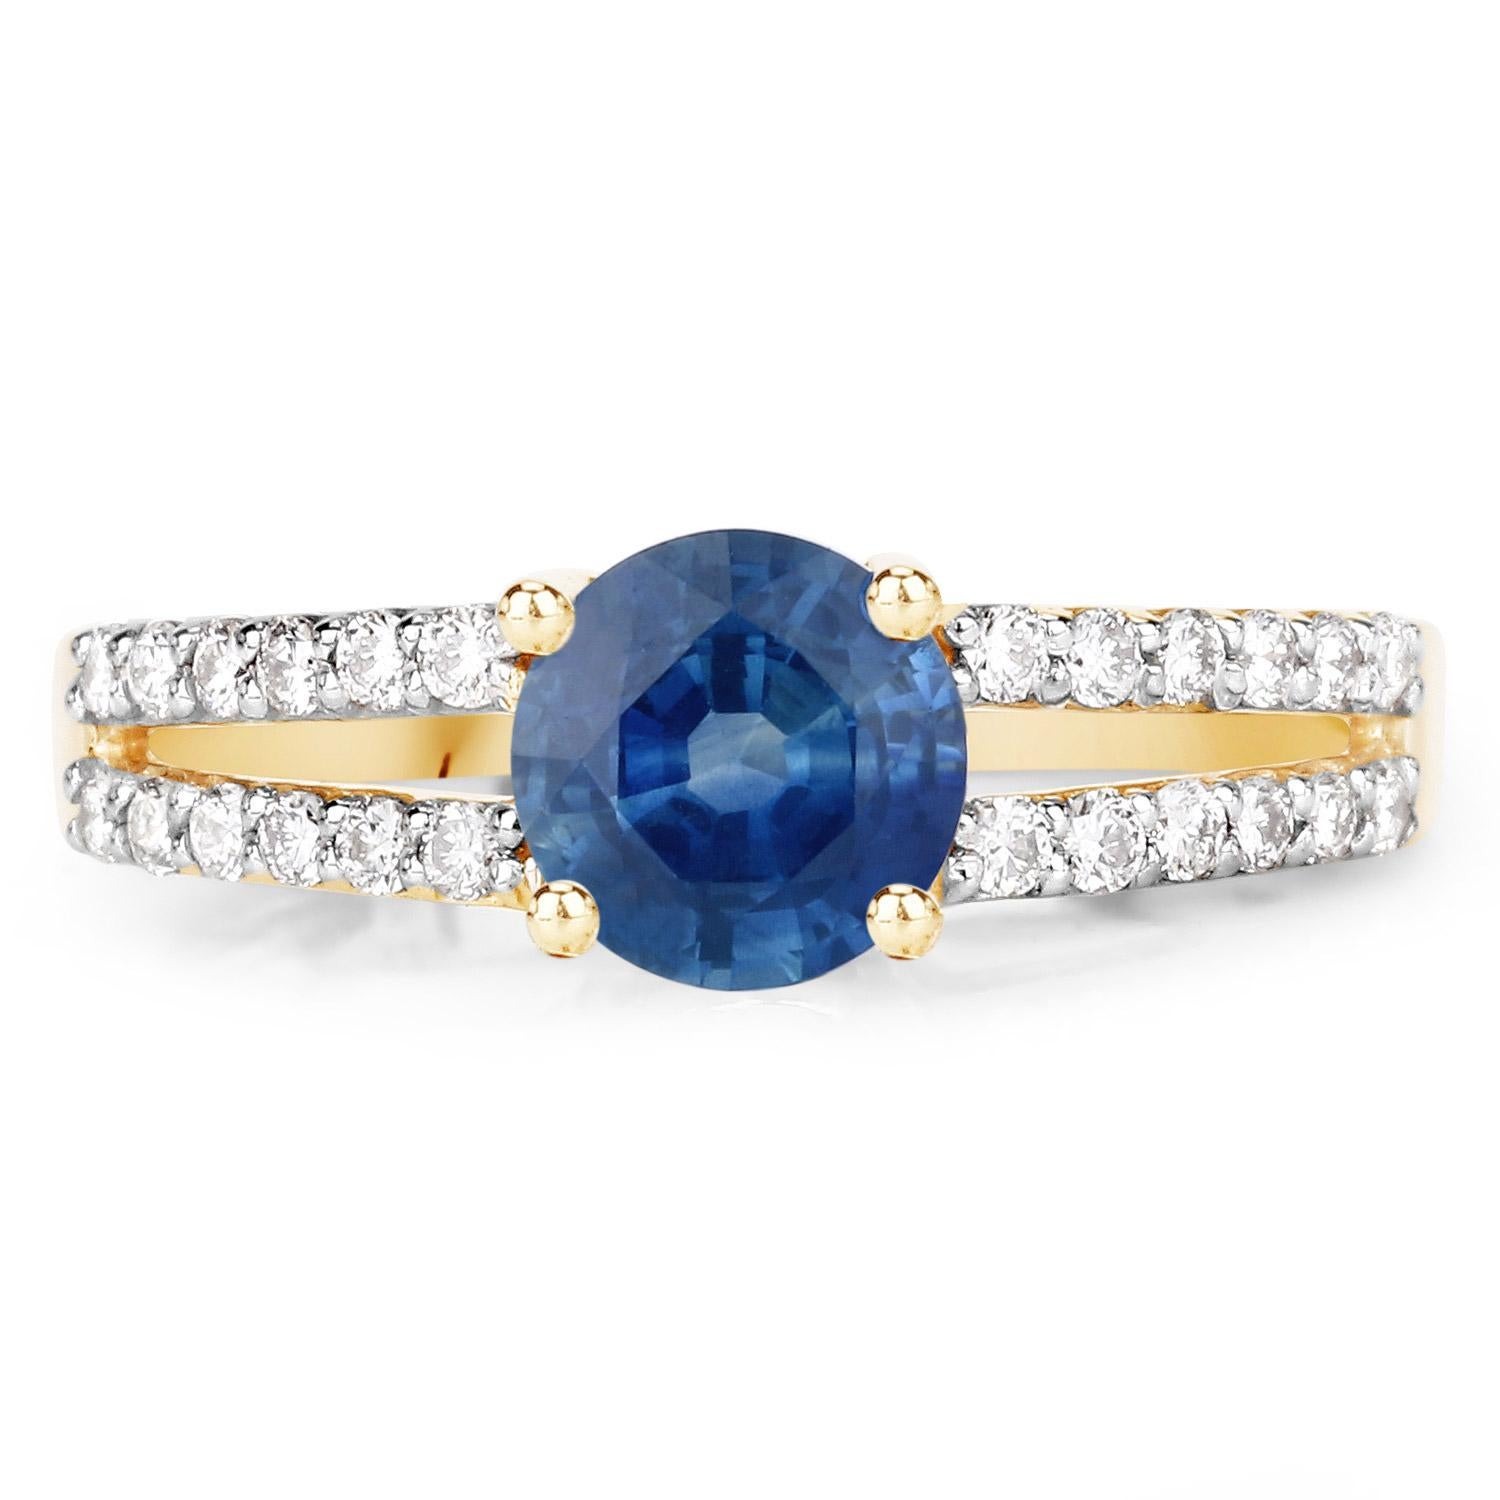 Contemporary Natural 1 Carat Blue Sapphire and Diamond Ring Set In 14K Yellow Gold For Sale